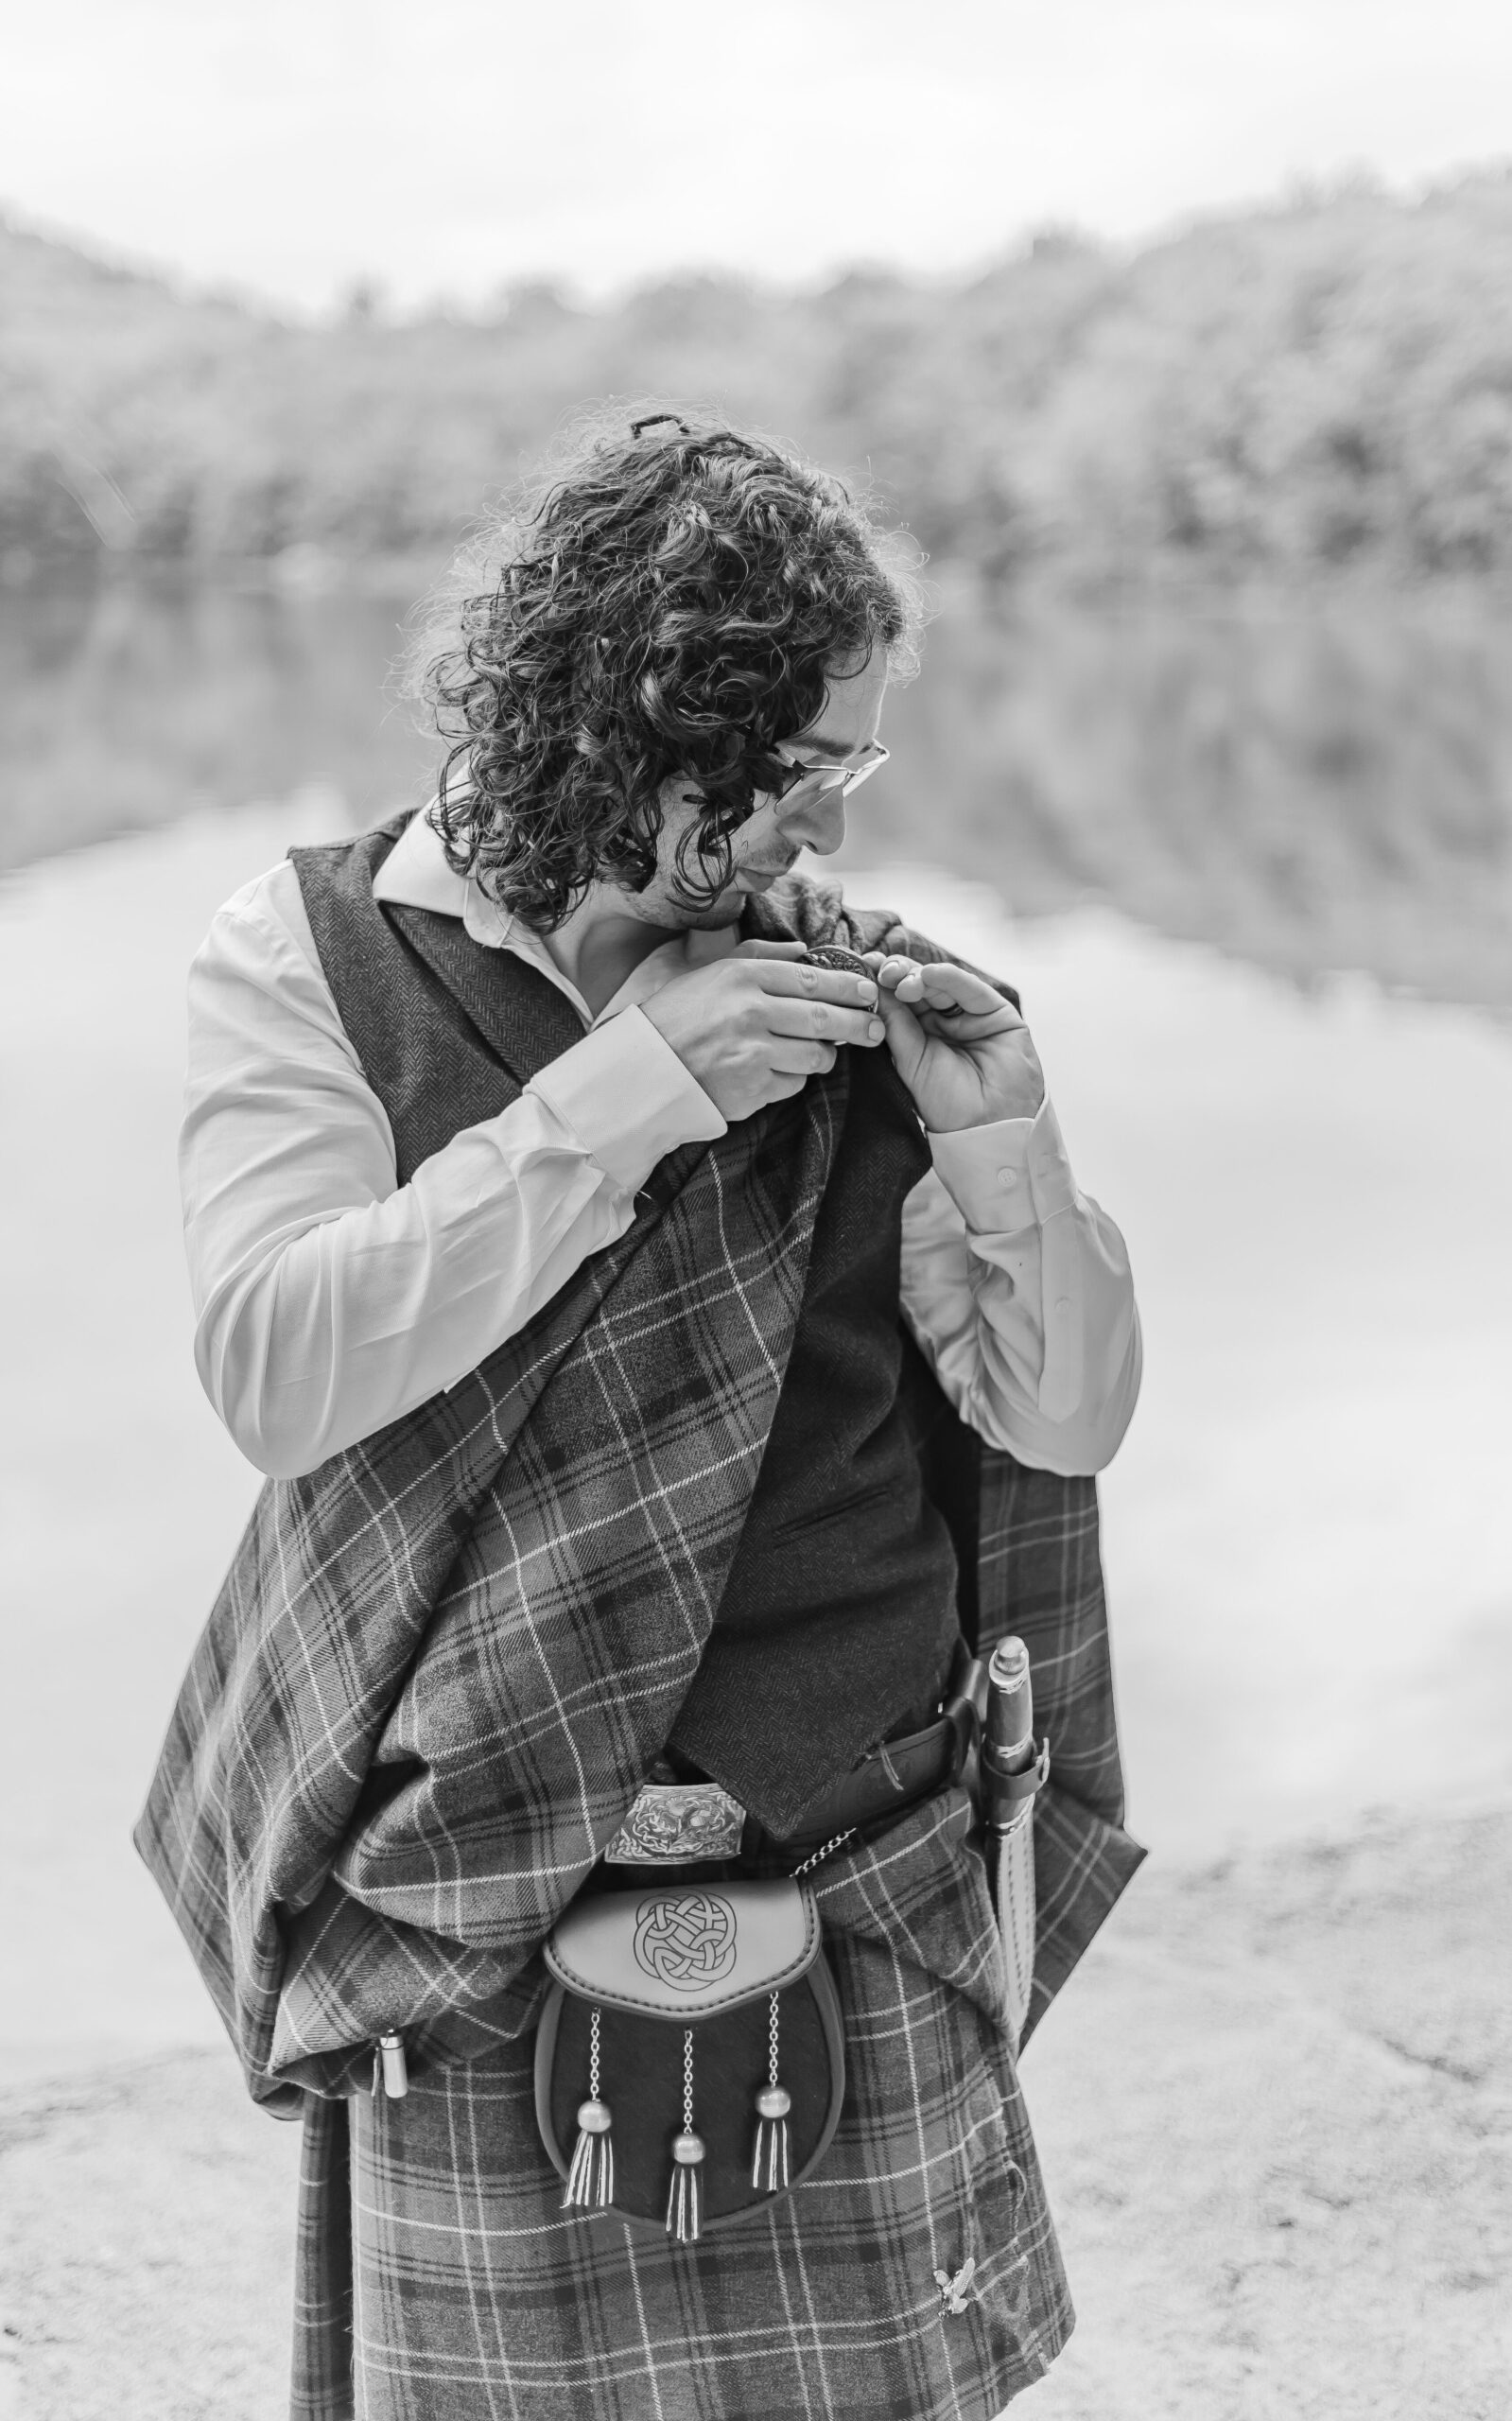 The groom finishes putting on his kilt for his wedding ceremony in Franconia Notch.